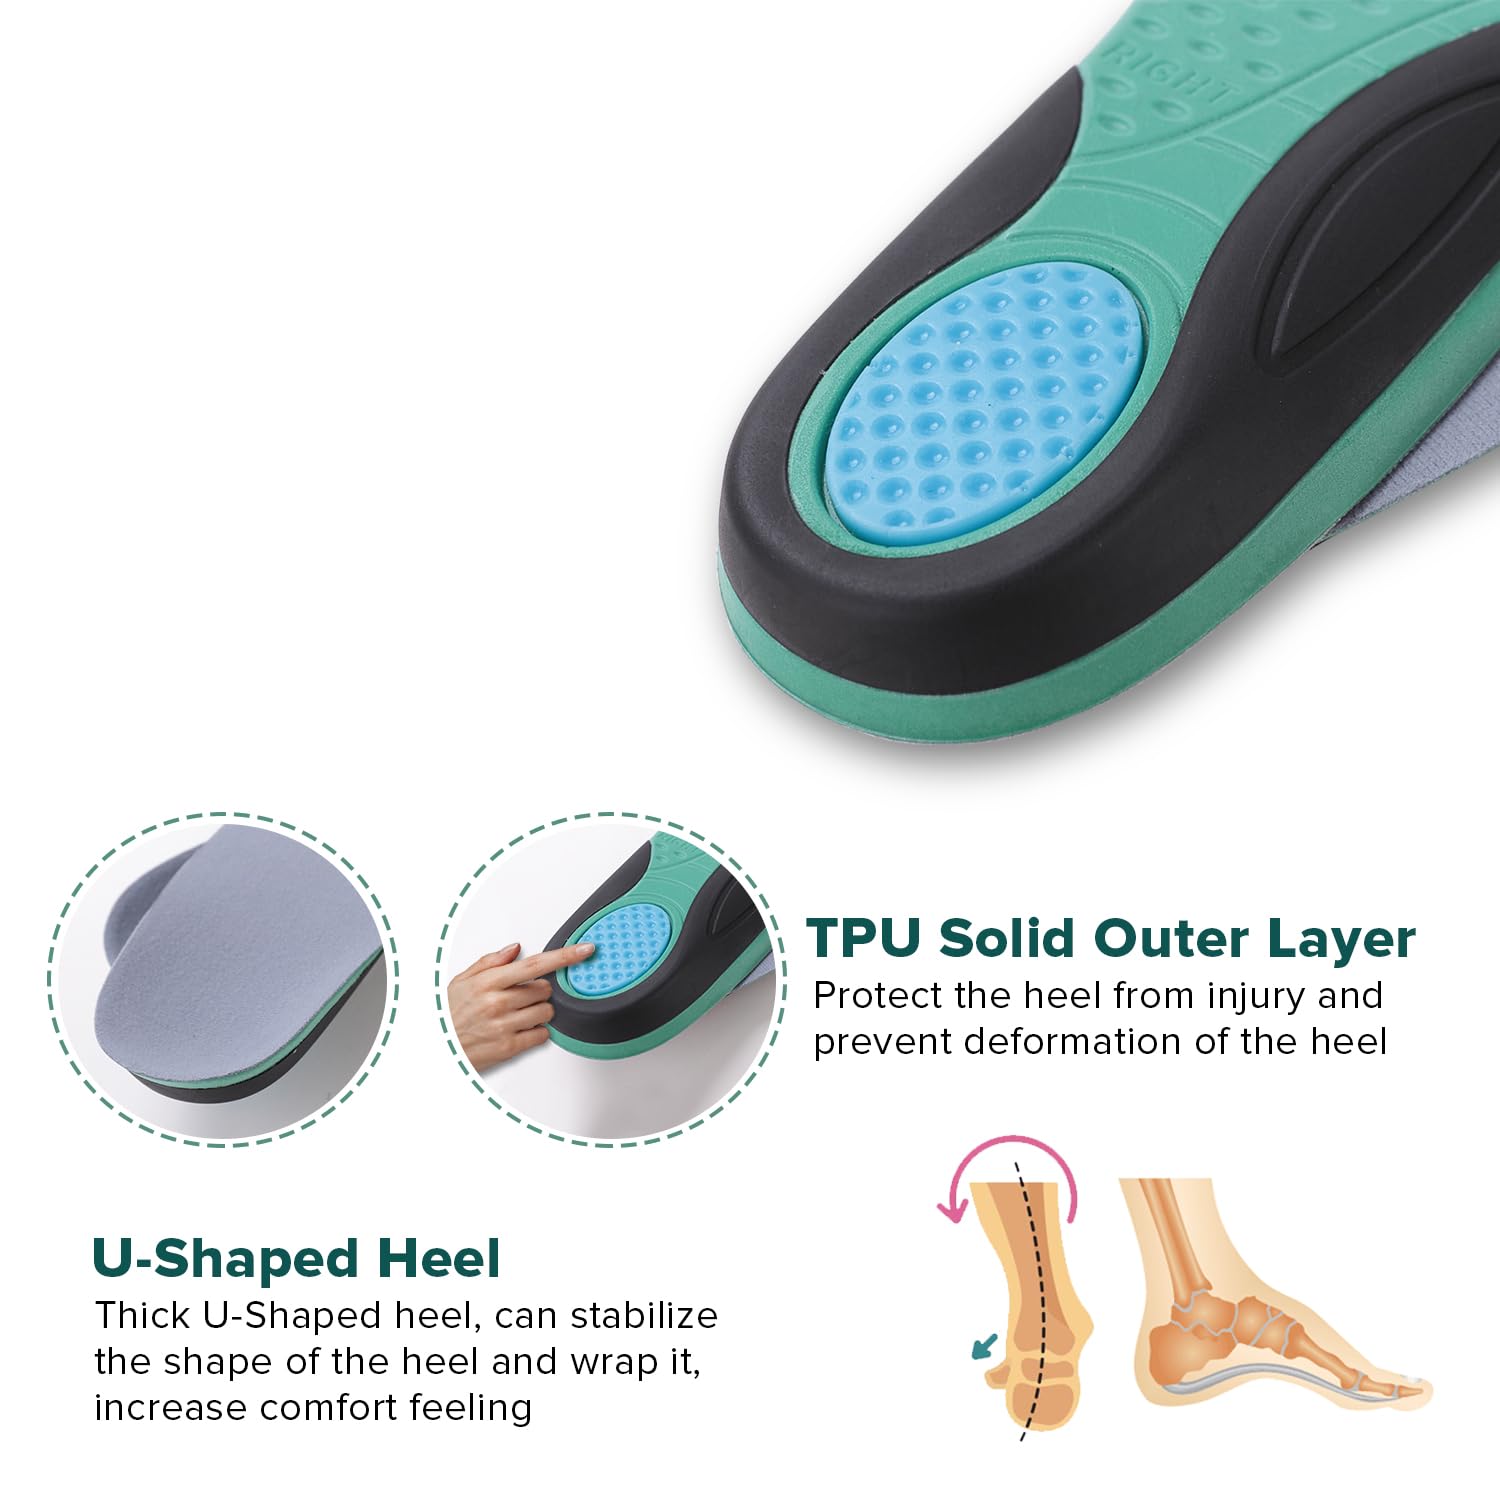 Dr Foot Orthotics for Arthritis Pain Insoles | For Arch Support, Planter Fasciitis, Arthritis, Plantar Pressure, Flat Feet | All Day Comfort | For Men & Women - 1 Pair - (Small Size)